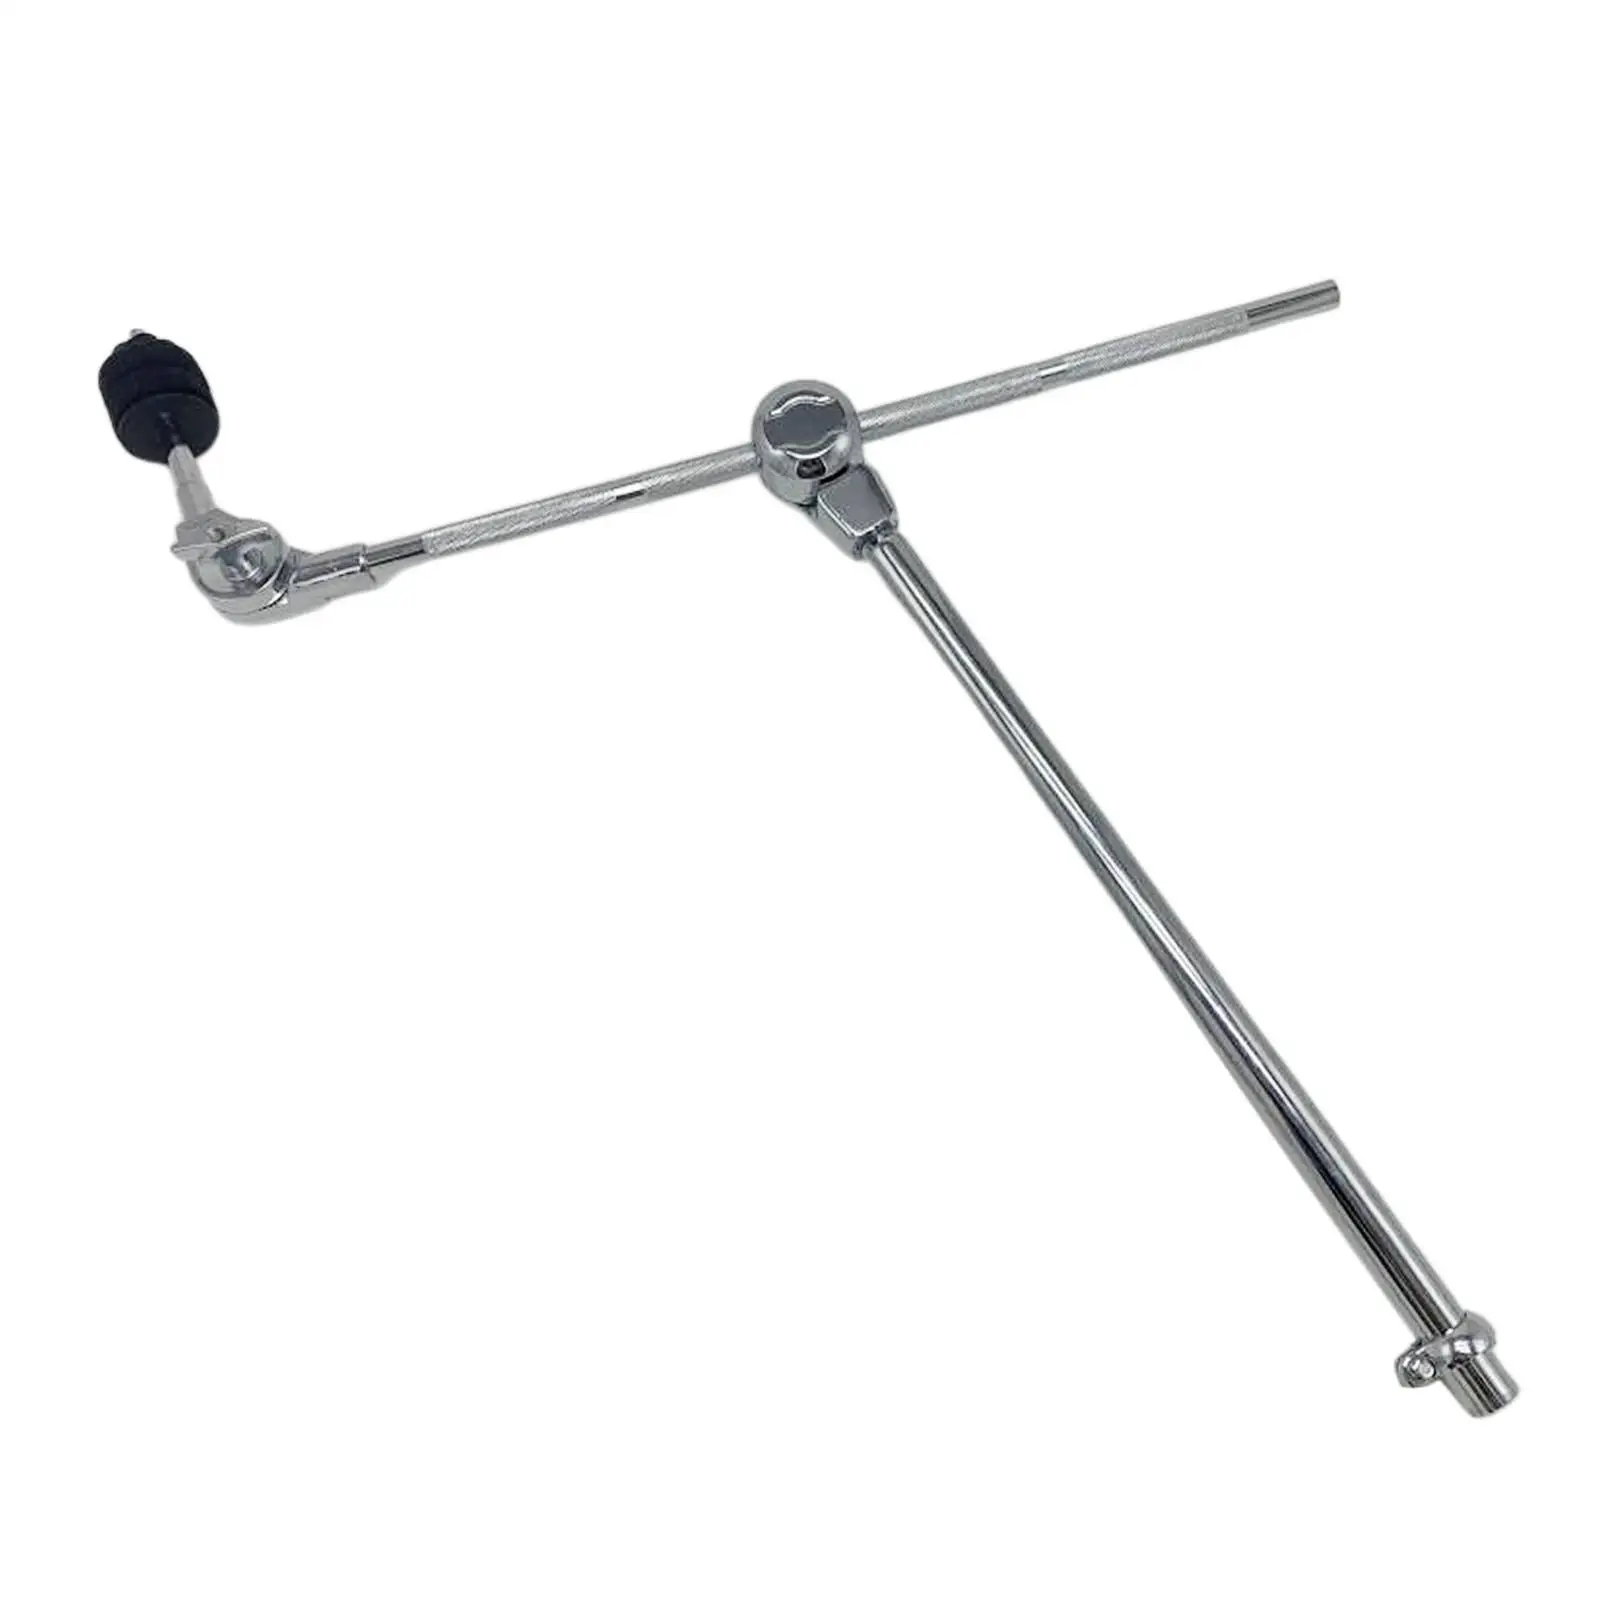 Heavy Cymbal Holder Cymbal Arm Sturdy 19mm Tube Single Locking Drum Parts Percussion Accessories Extension Clamp Cymbal Stand